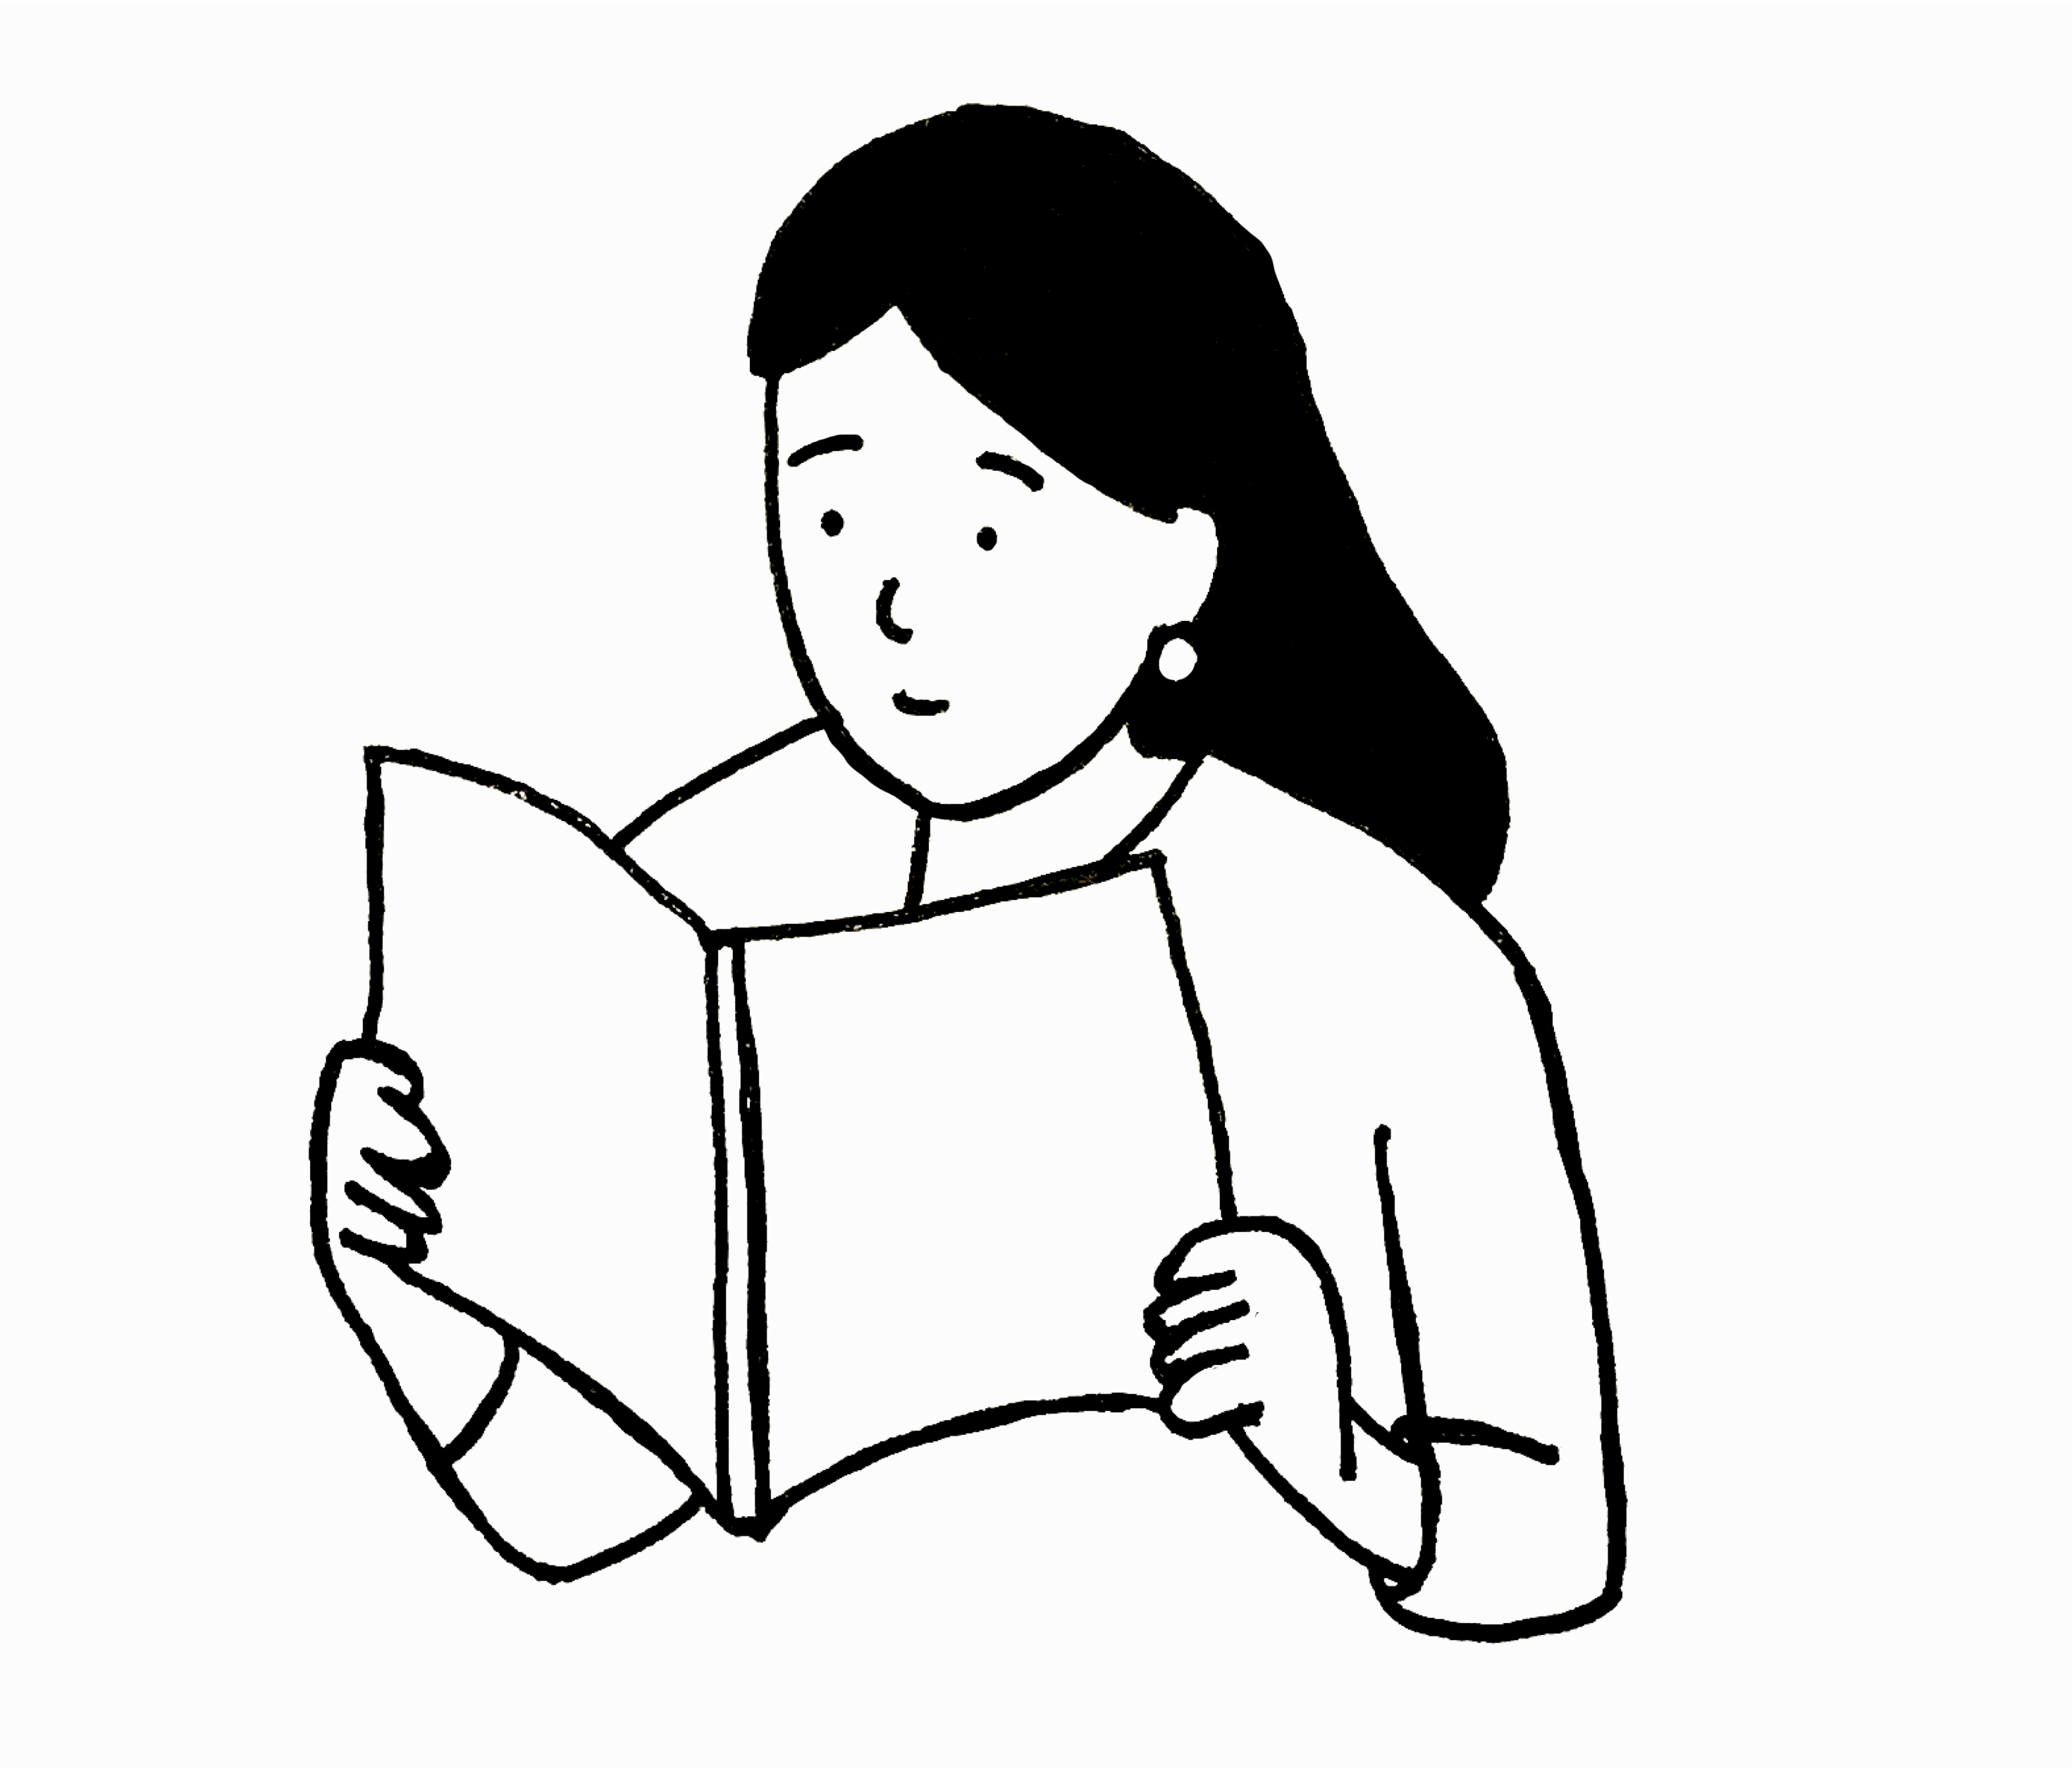 An illustration of a woman reading a book.